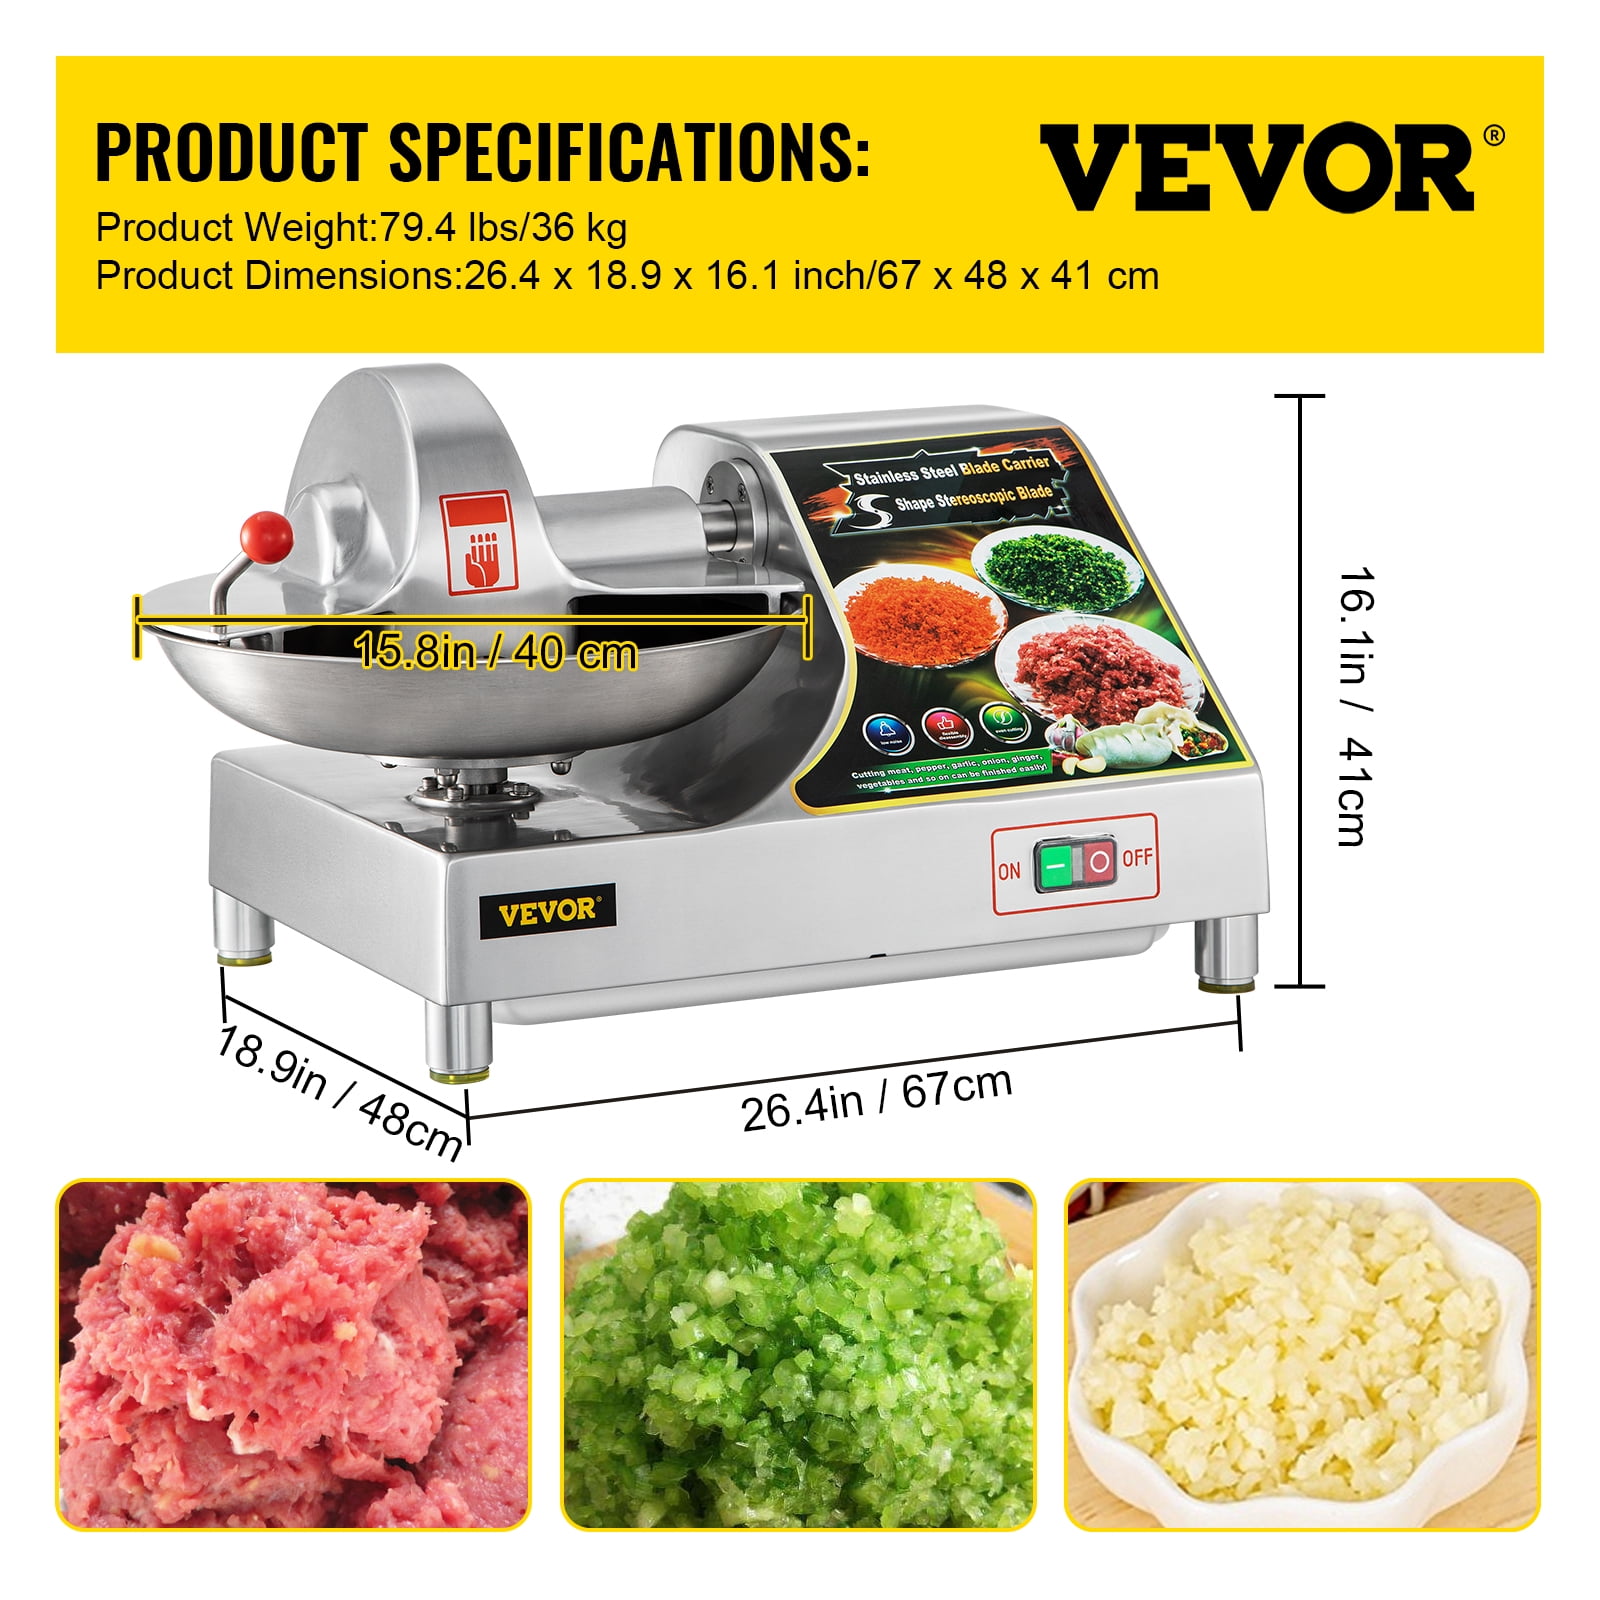 10L Commercial Meat Bowl Cutter Mixer, 400W Multifunctional Meat